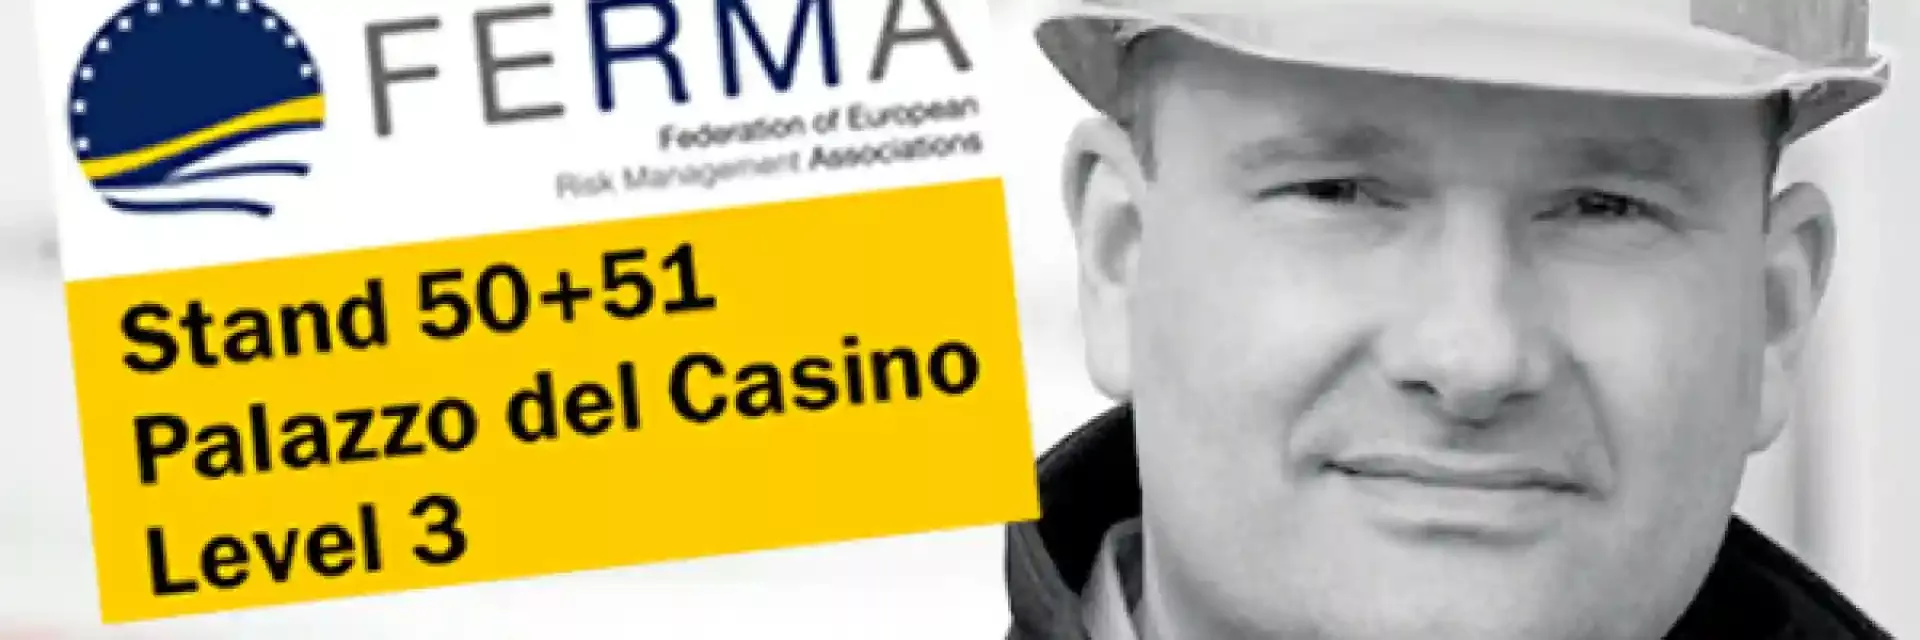 2015 FERMA conference